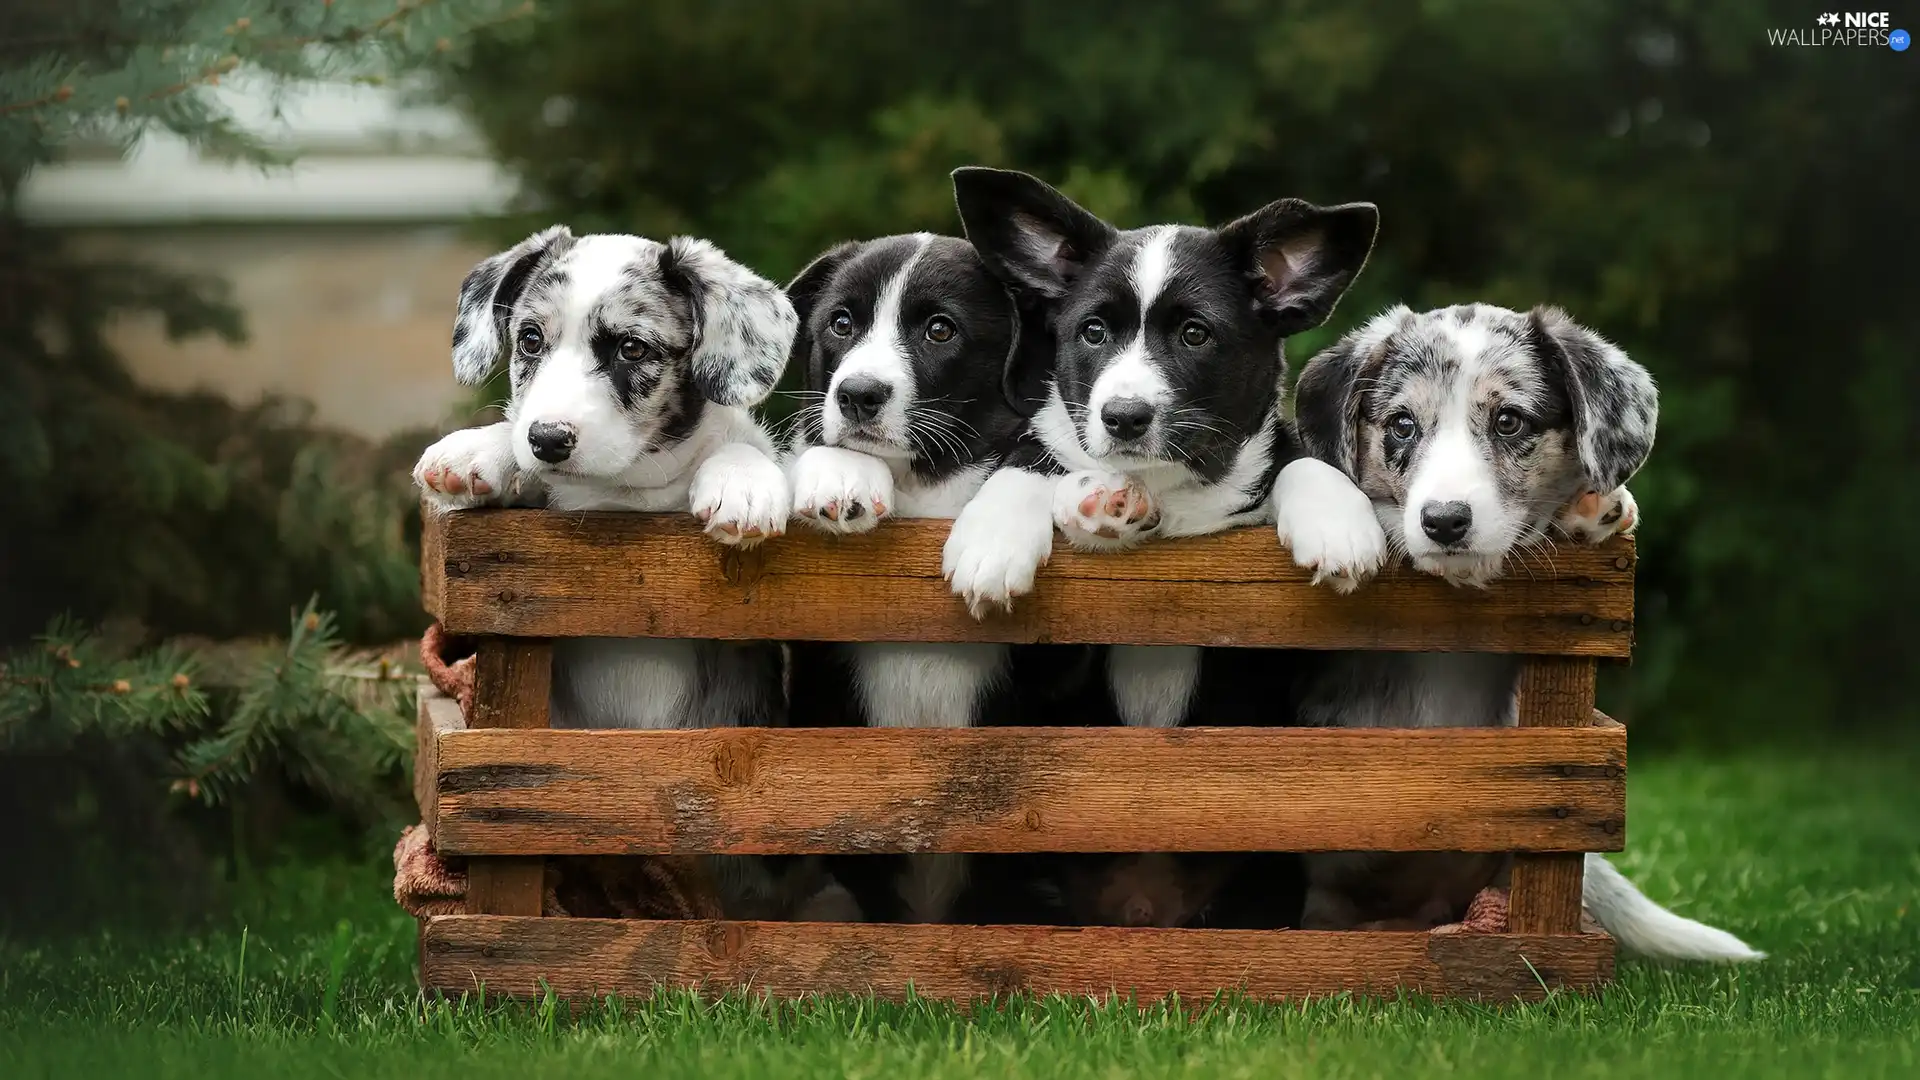 Black and white, four, box, grass, puppies, Dogs